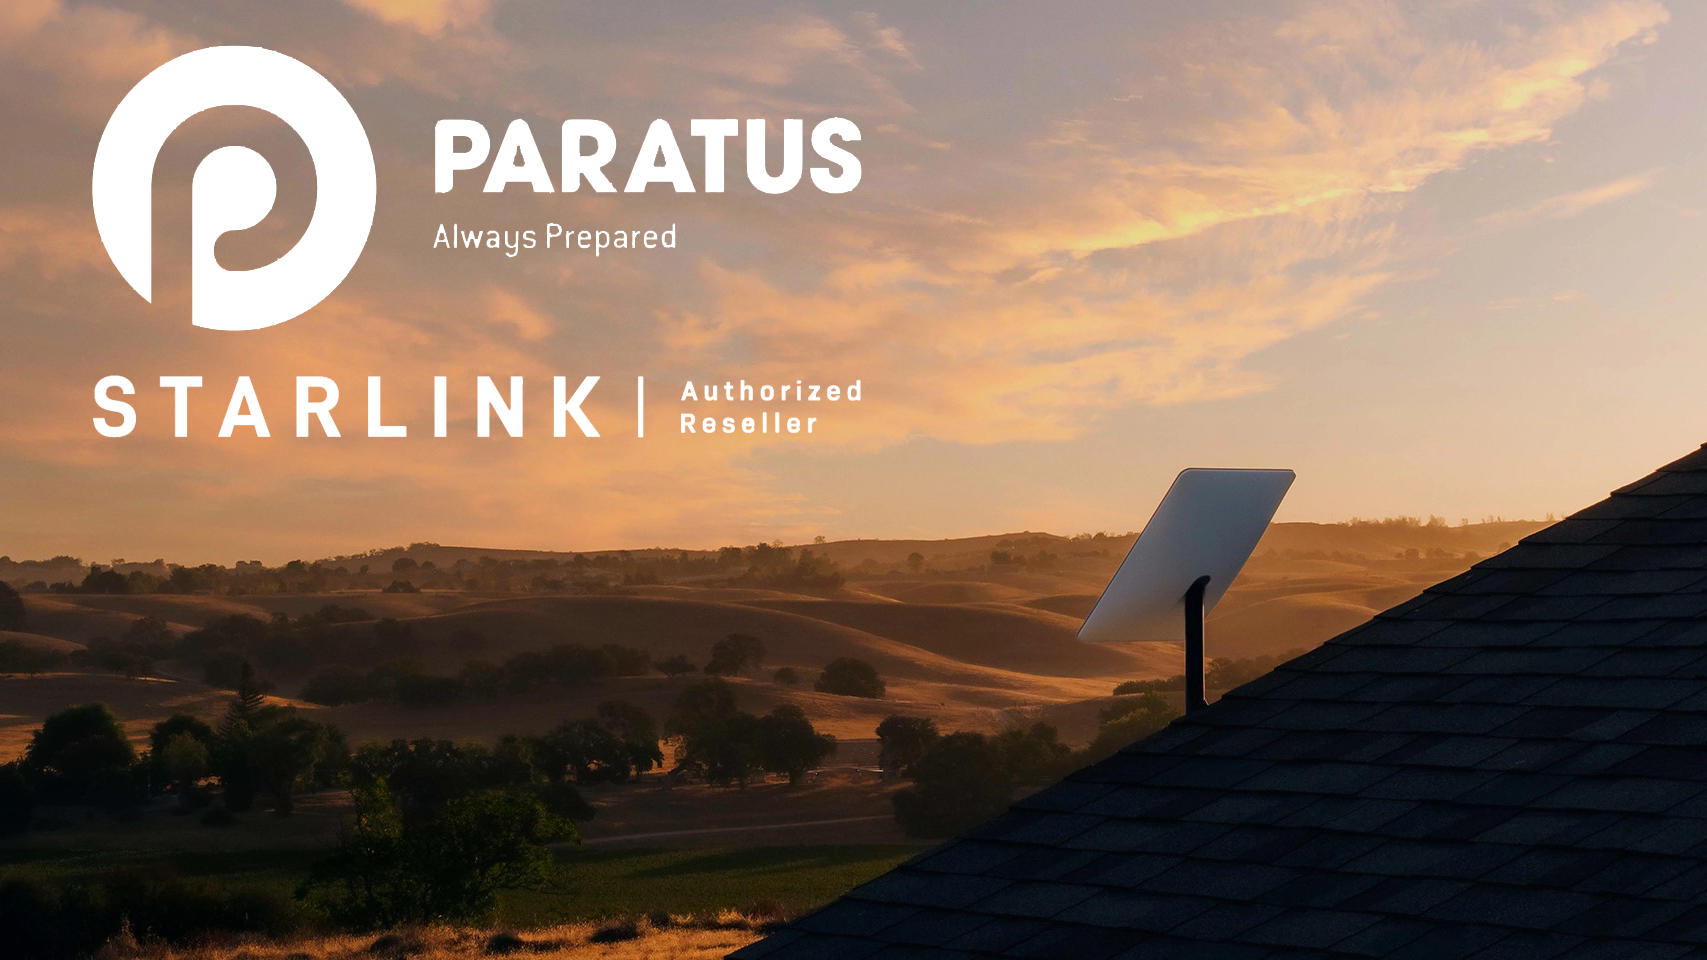 Paratus Group, Starlink’s Africa-wide authorized reseller